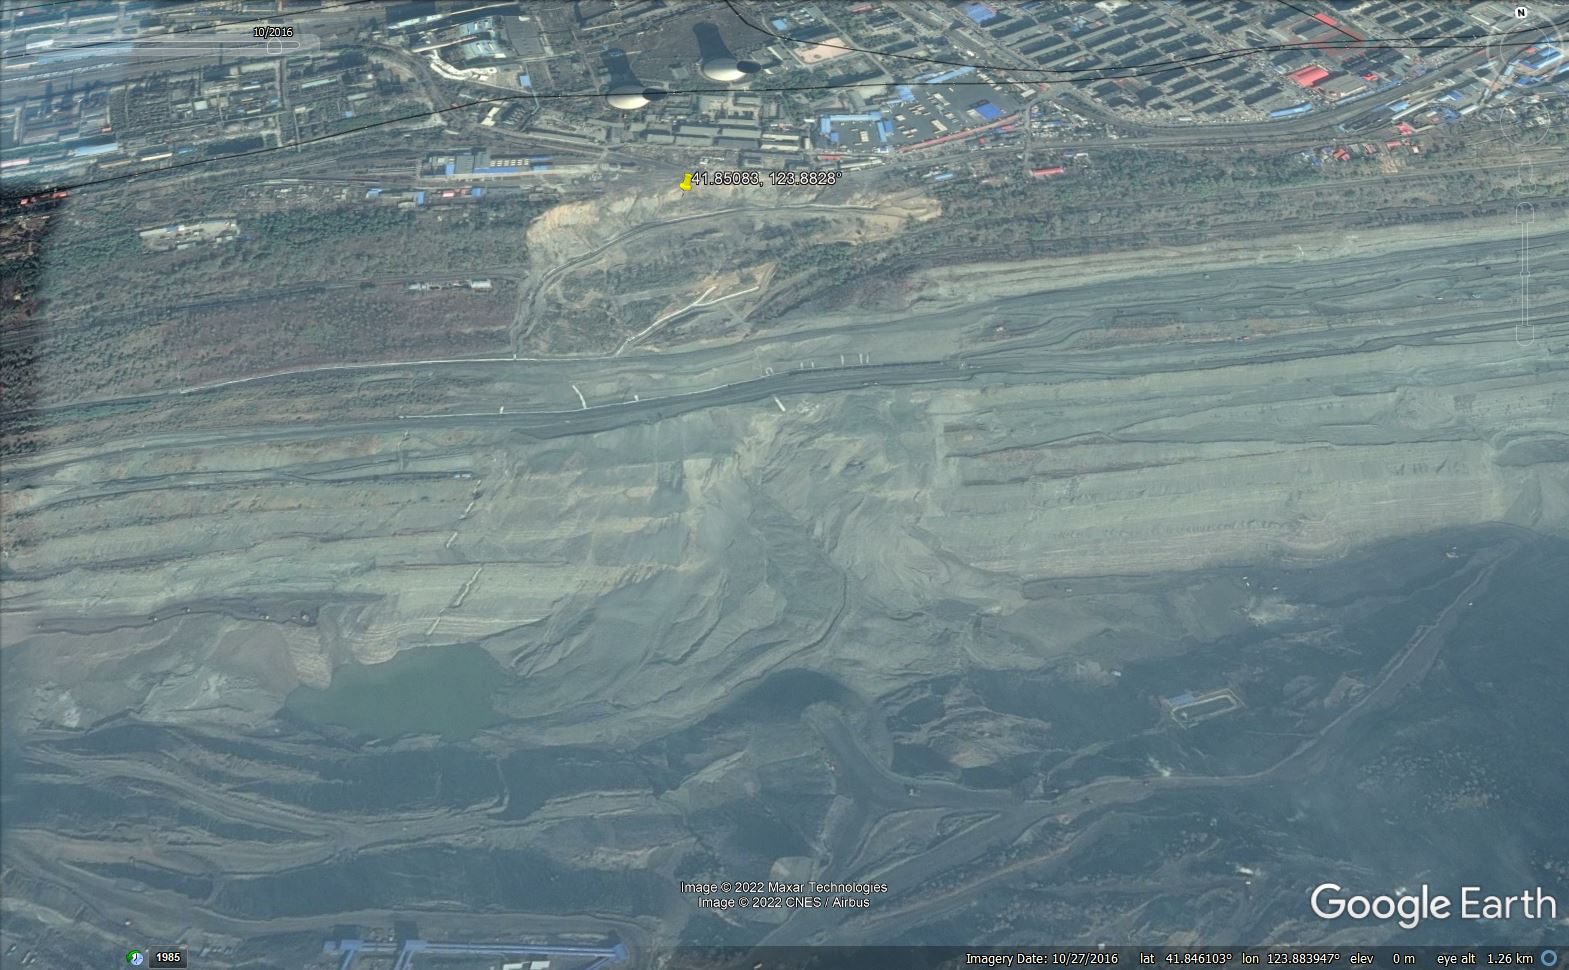 Google Earth image of the aftermath of the 2016 landslide at Fushun in China.